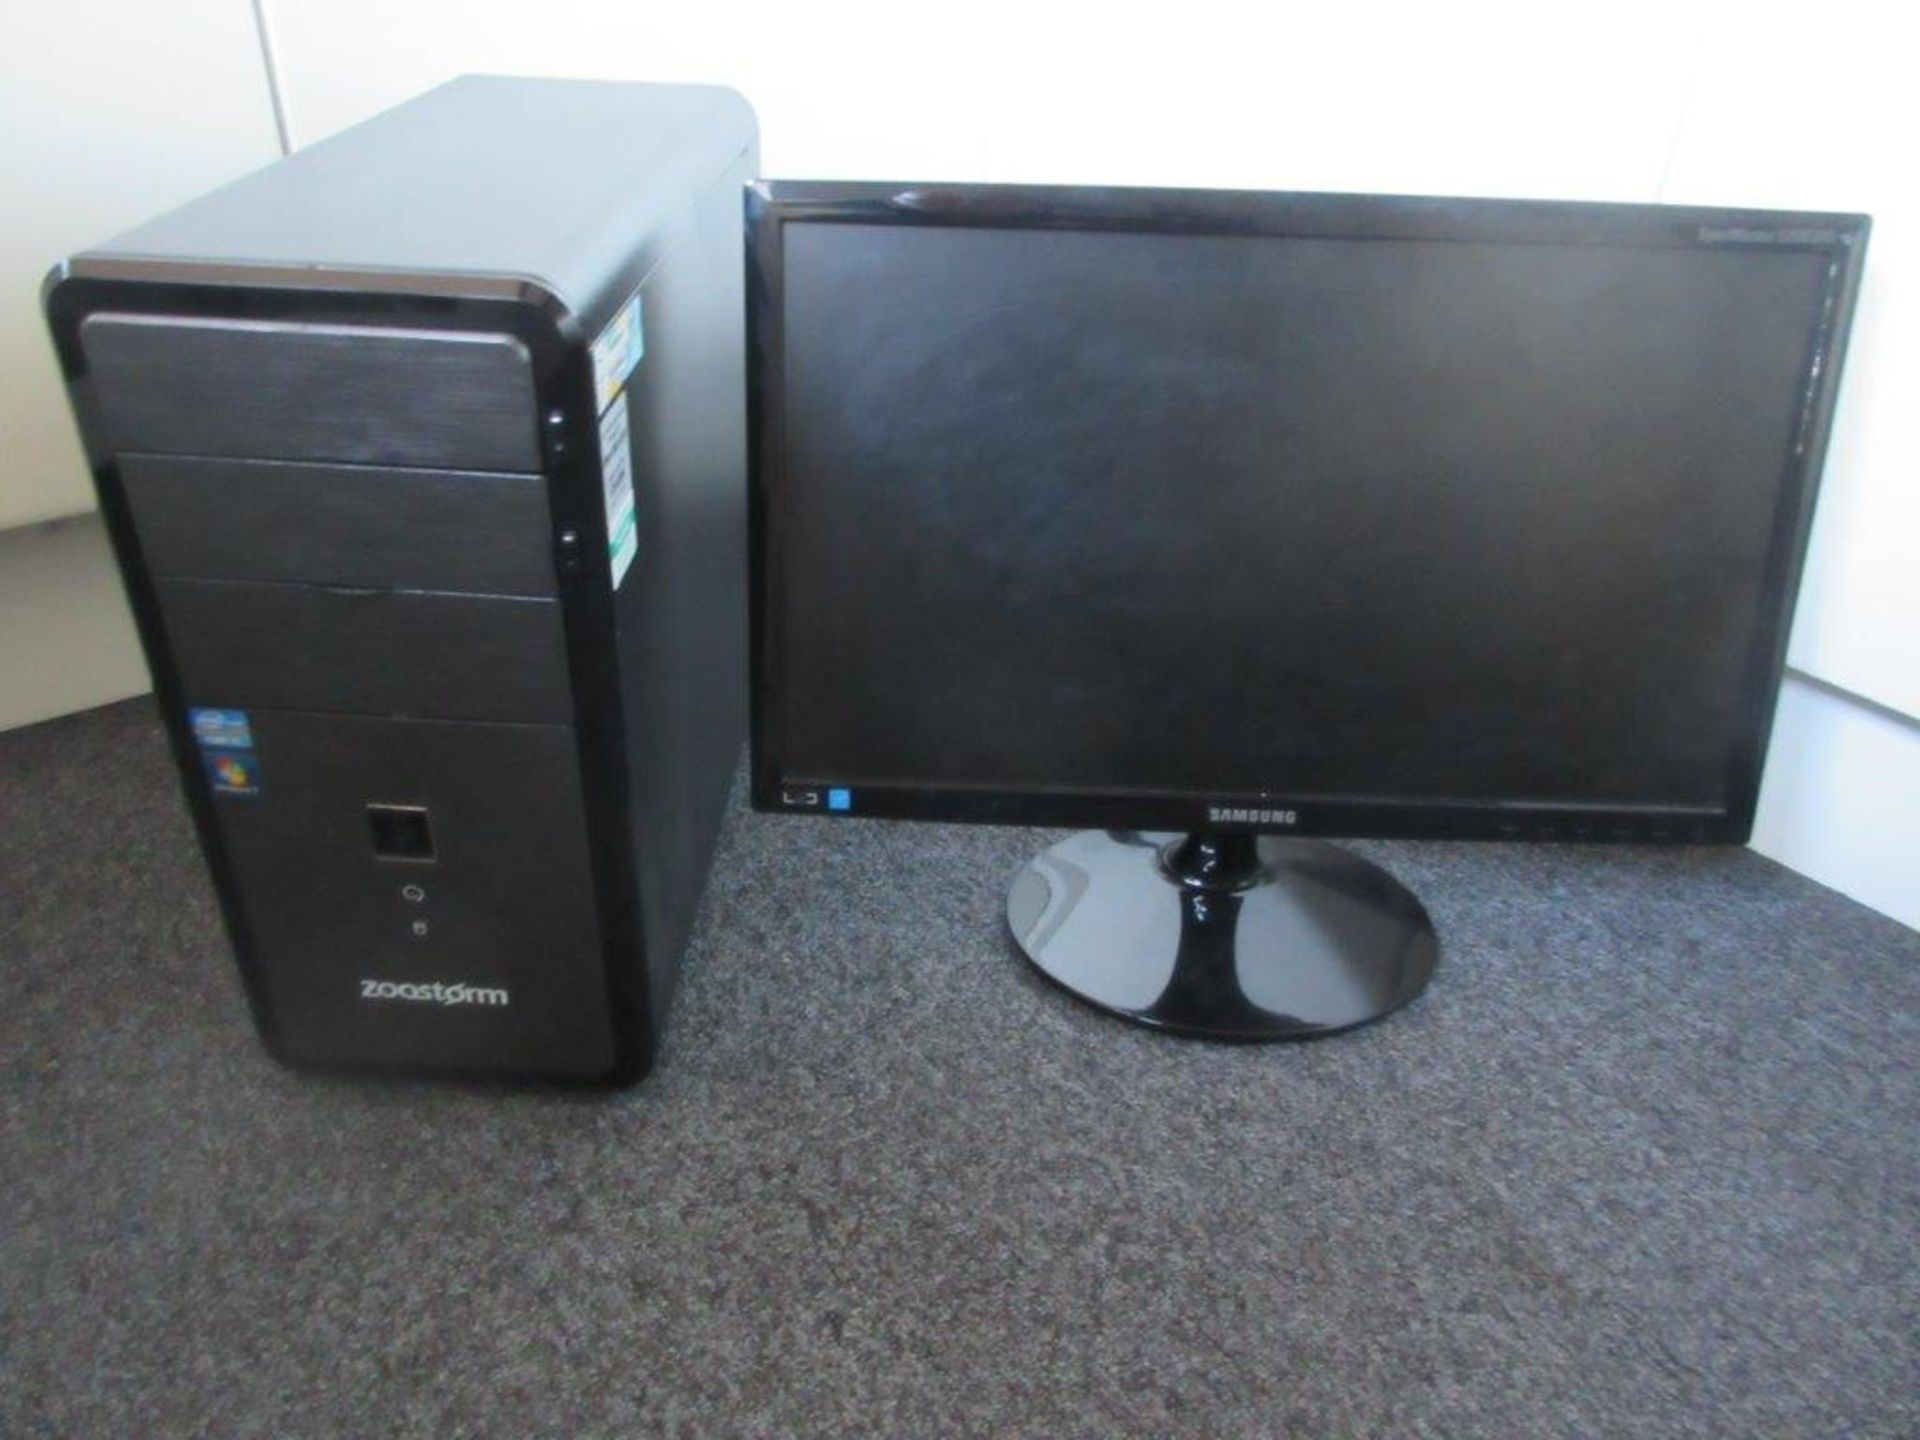 Zoostorm tower desktop computer with flat screen monitor incorporating i5 processor